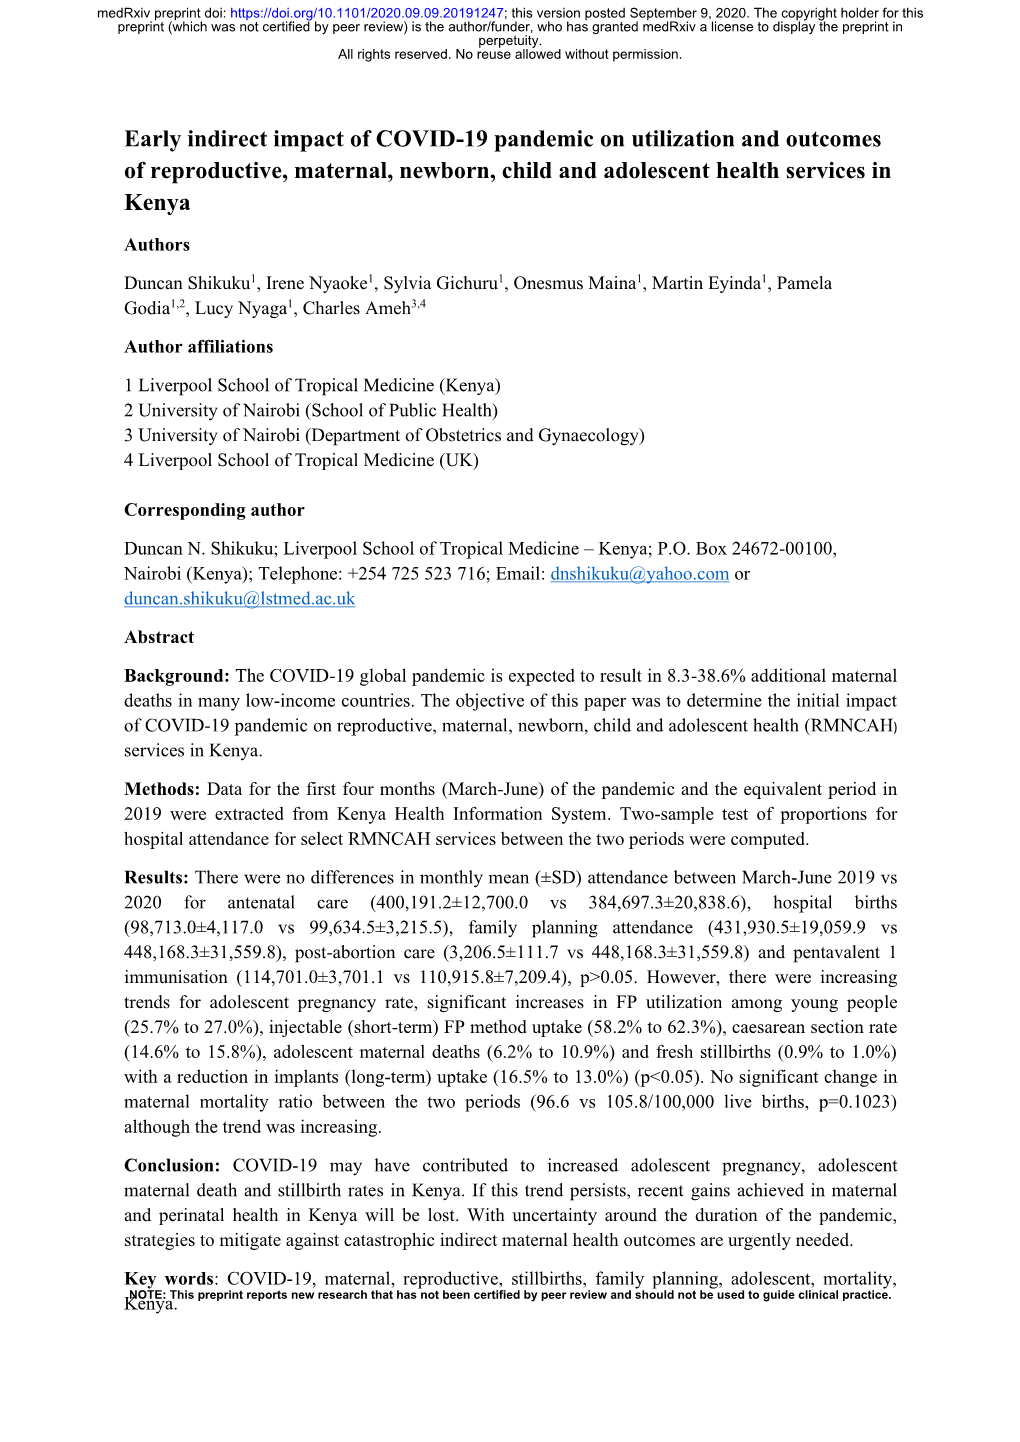 Early Indirect Impact of COVID-19 Pandemic on Utilization and Outcomes of Reproductive, Maternal, Newborn, Child and Adolescent Health Services in Kenya